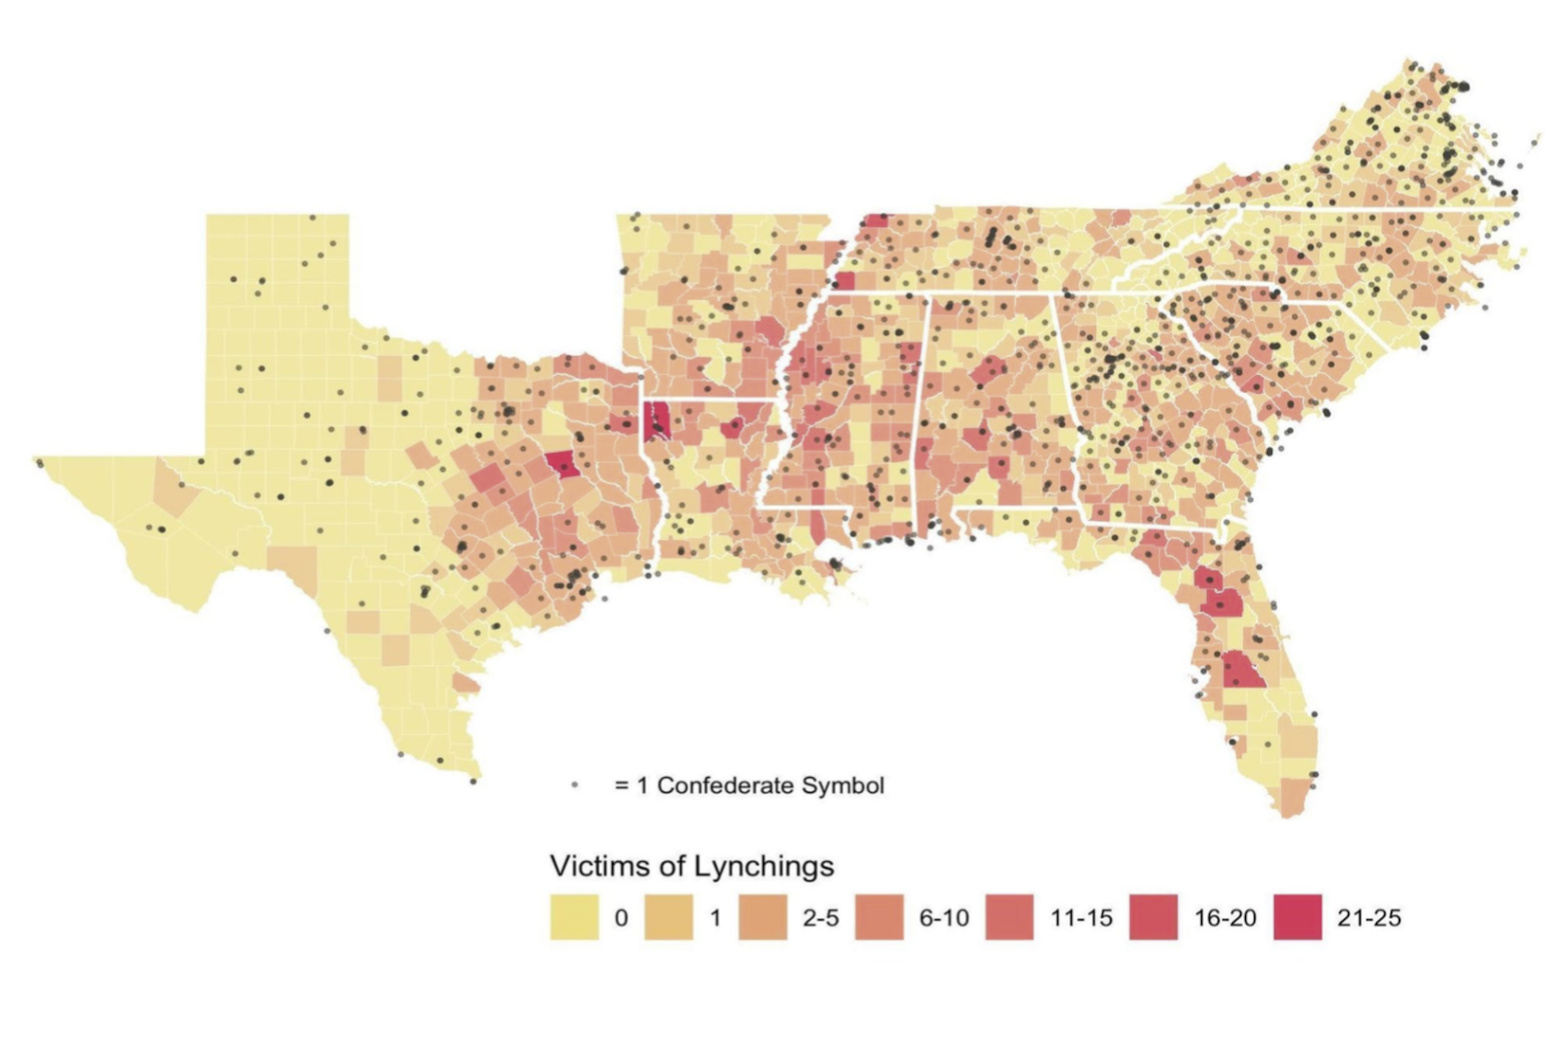 The researchers created a map to visualize their findings. Darker colors denote higher numbers of lynching victims, and each dot represents the location of a Confederate memorialization. Source: Proceedings of the National Academy of Sciences. (Graphic by Samuel Powers)